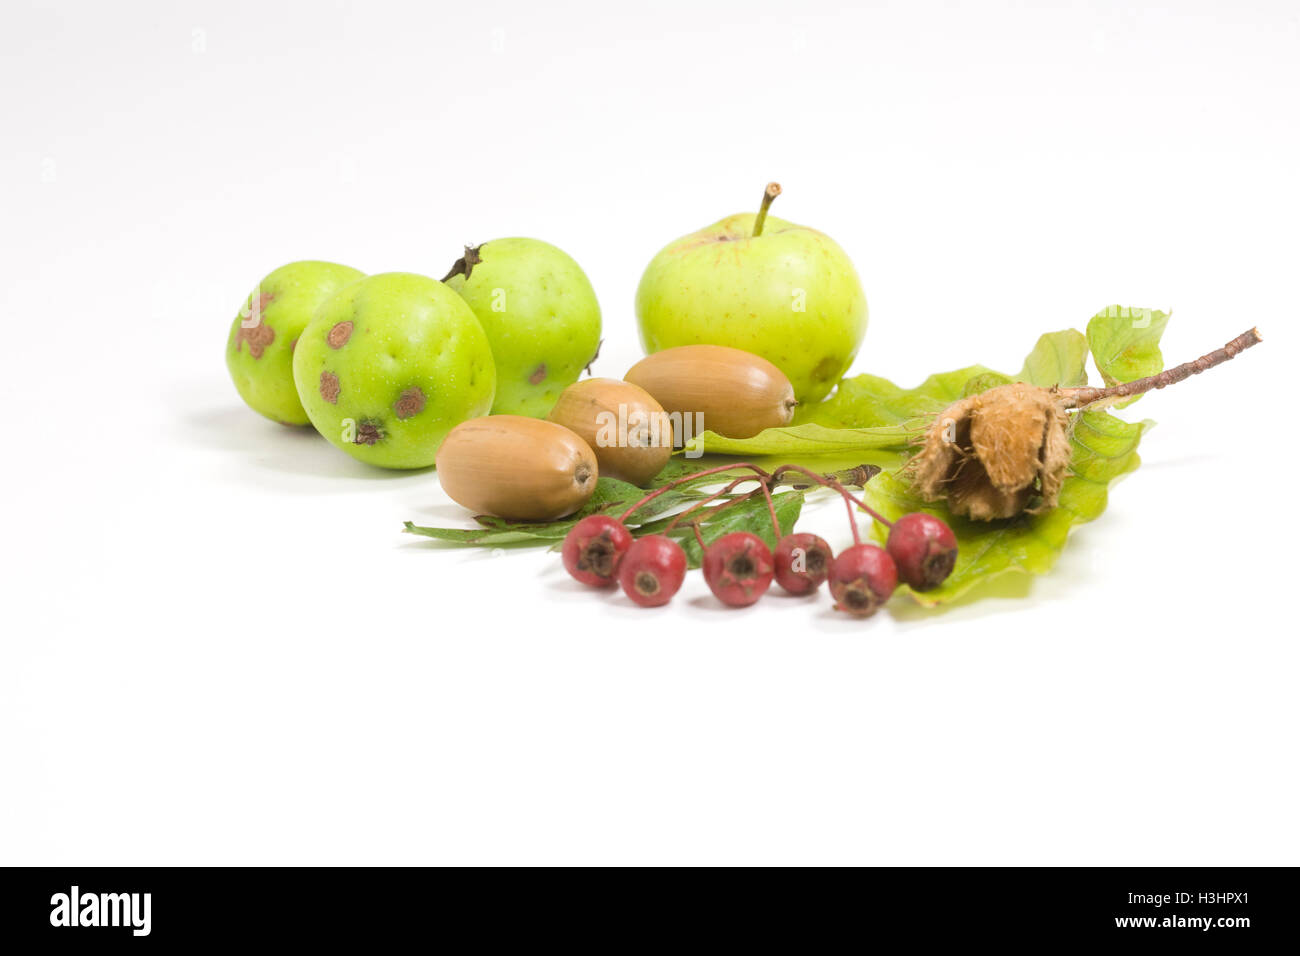 Crab apples. acorns, hawthorn berries and beech nut on a white background. Stock Photo